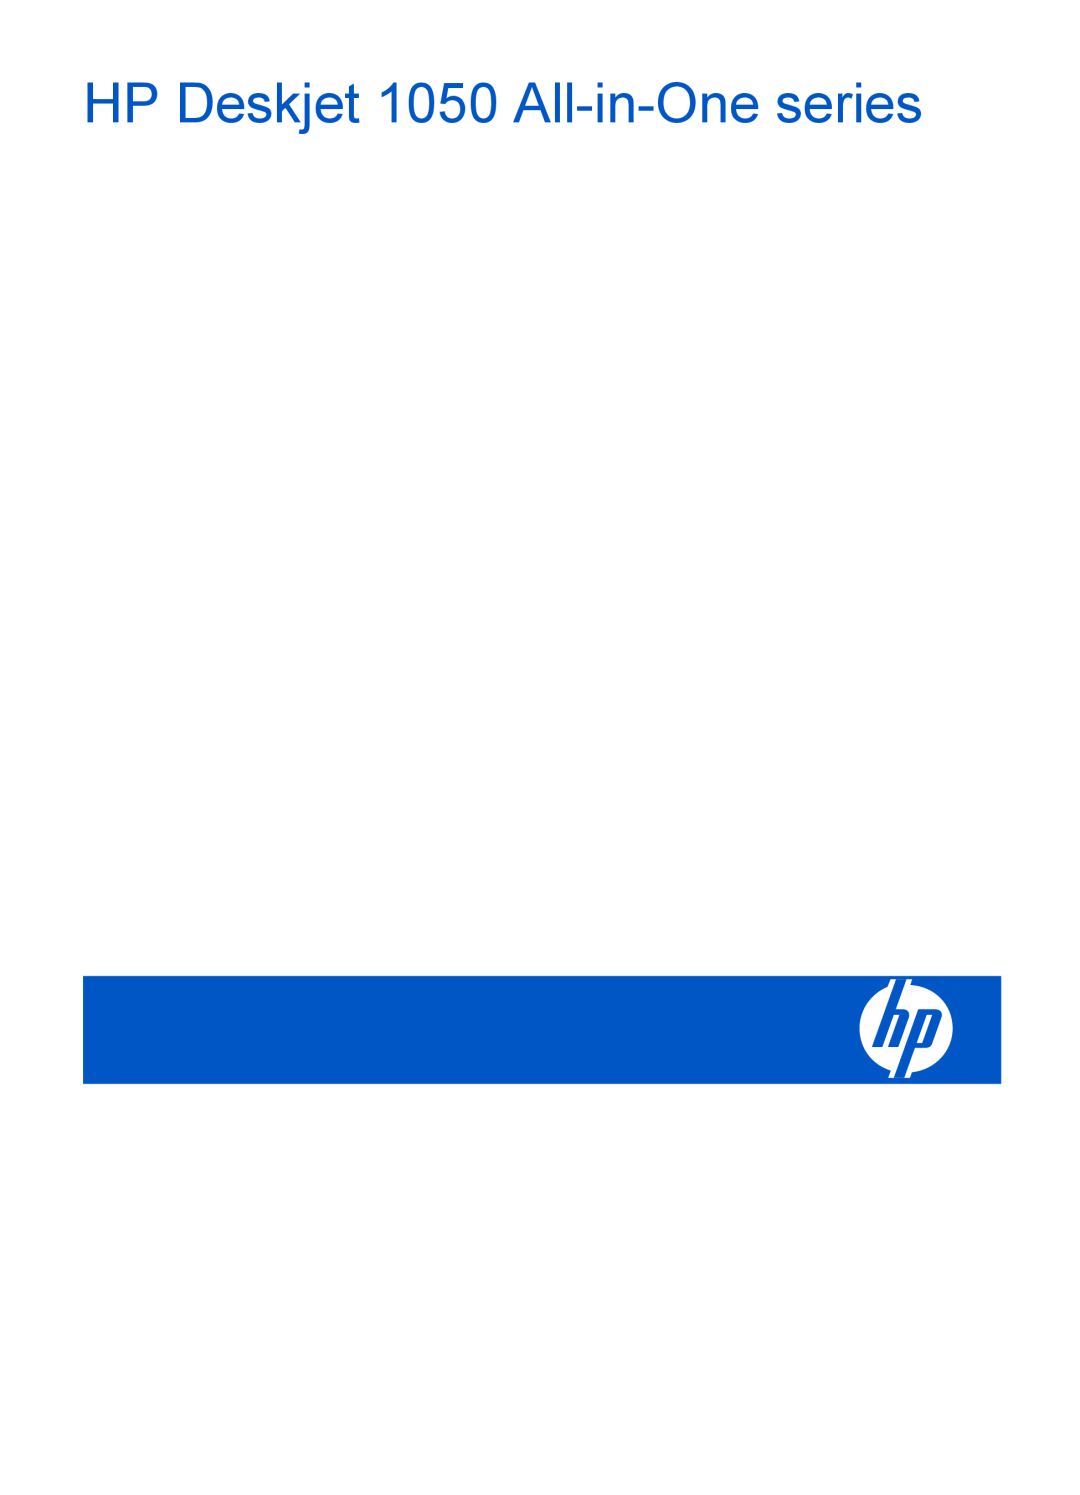 HP 1050 - J410a, 1051 manual English, CH350-90038* *CH350-90038, Information, Windows, Find electronic Help, Find Readme 